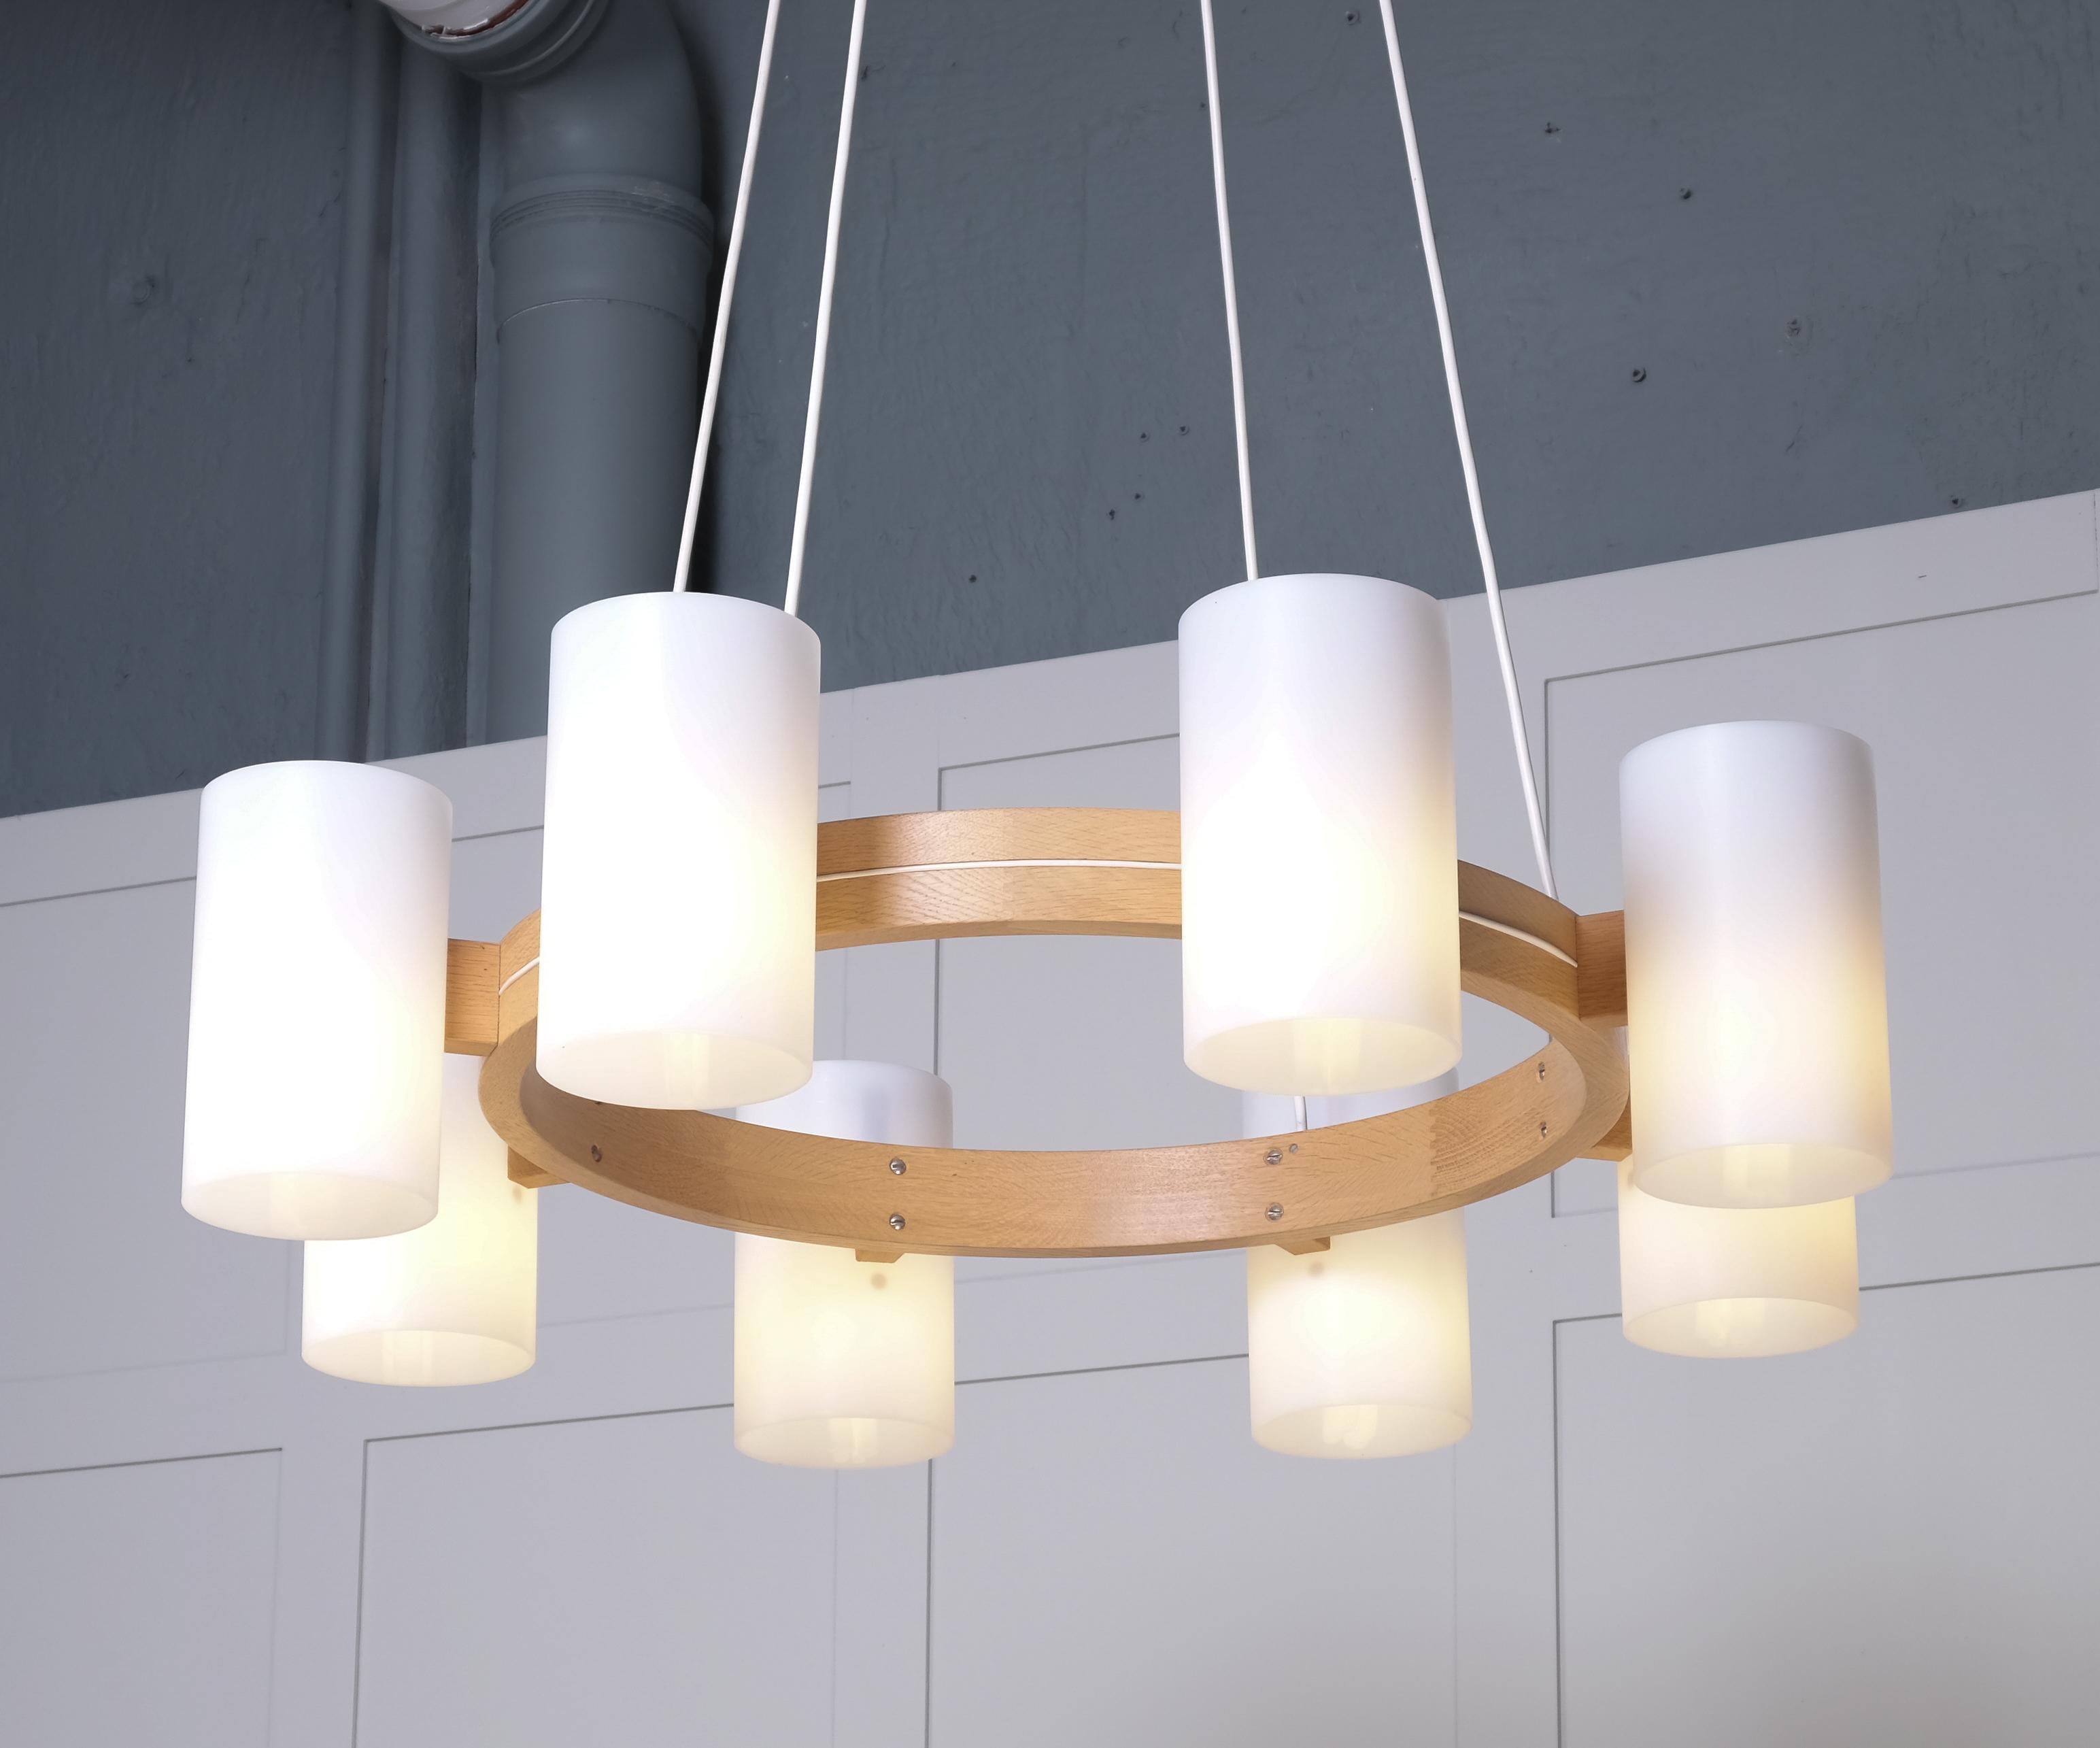 Set of 6 Chandeliers by Uno & Östen Kristiansson for Luxus, 1960s For Sale 2